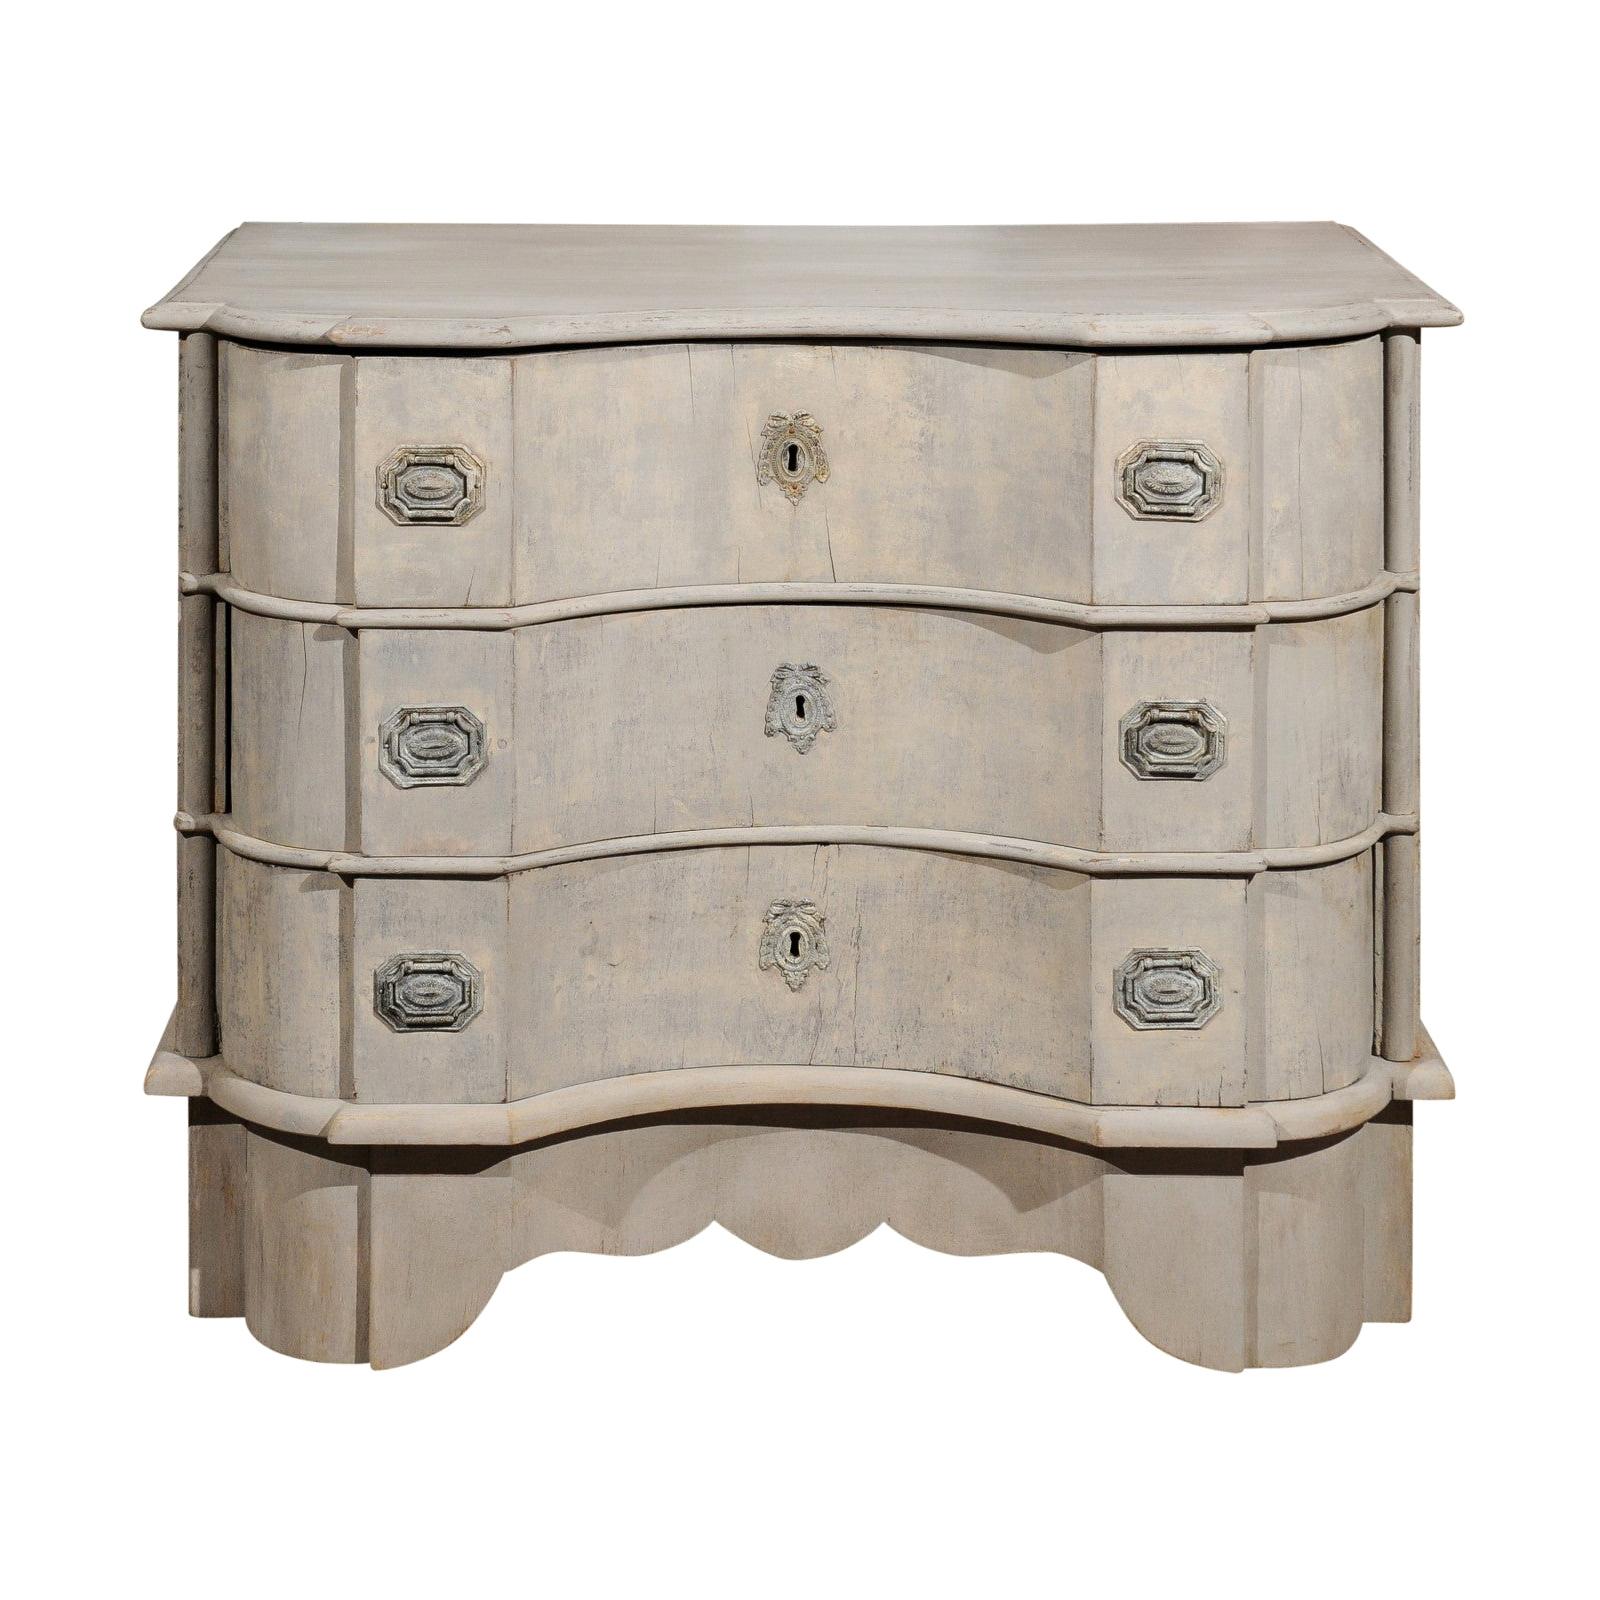 1740s Dutch Three-Drawer Serpentine Painted Wood Commode